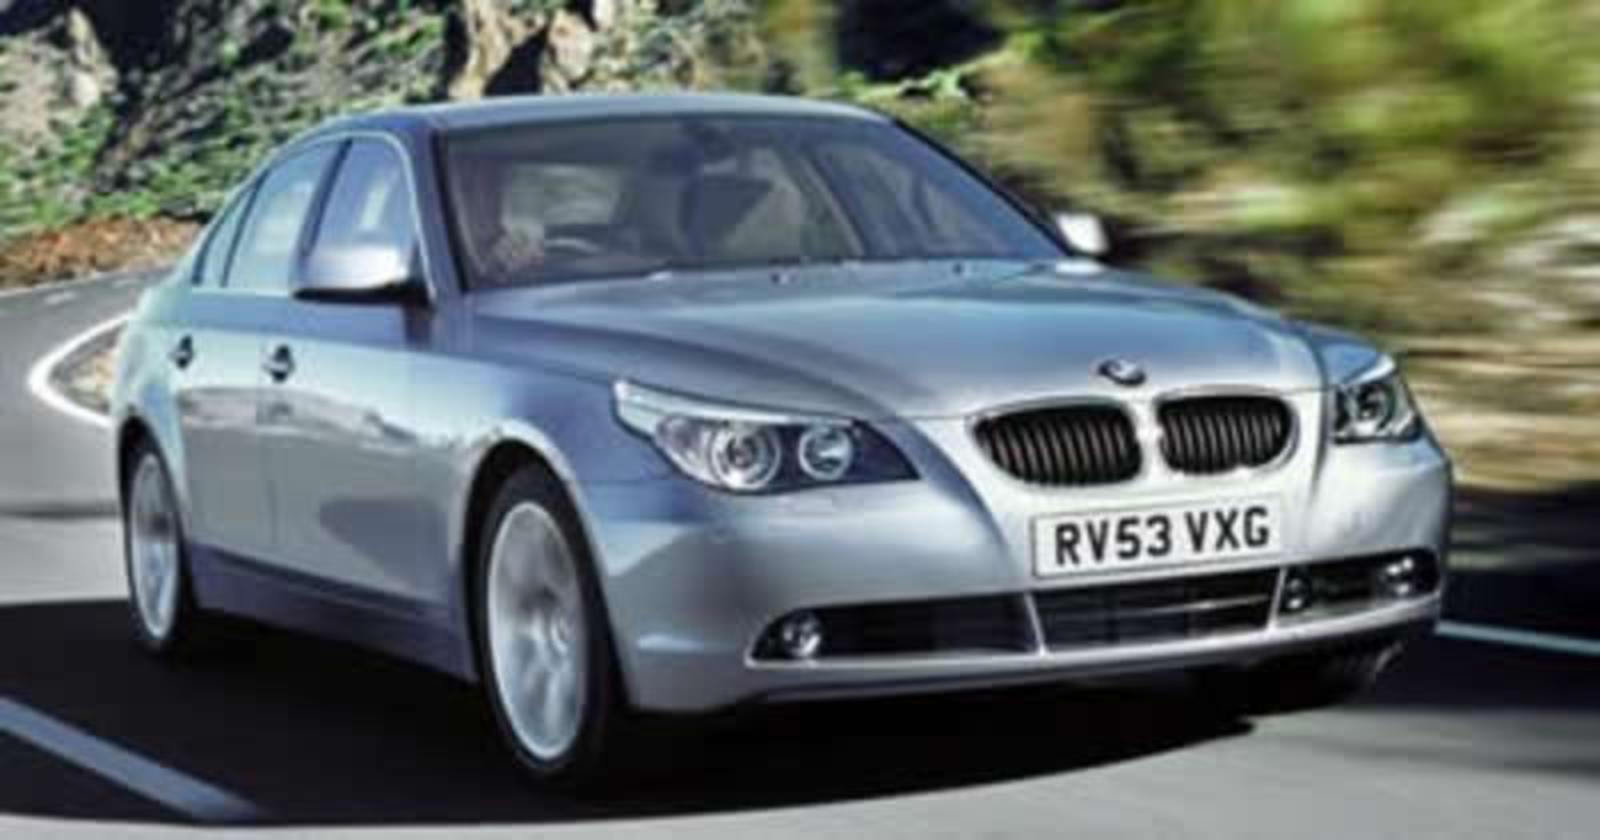 The BMW 523i, 525i and 530i will